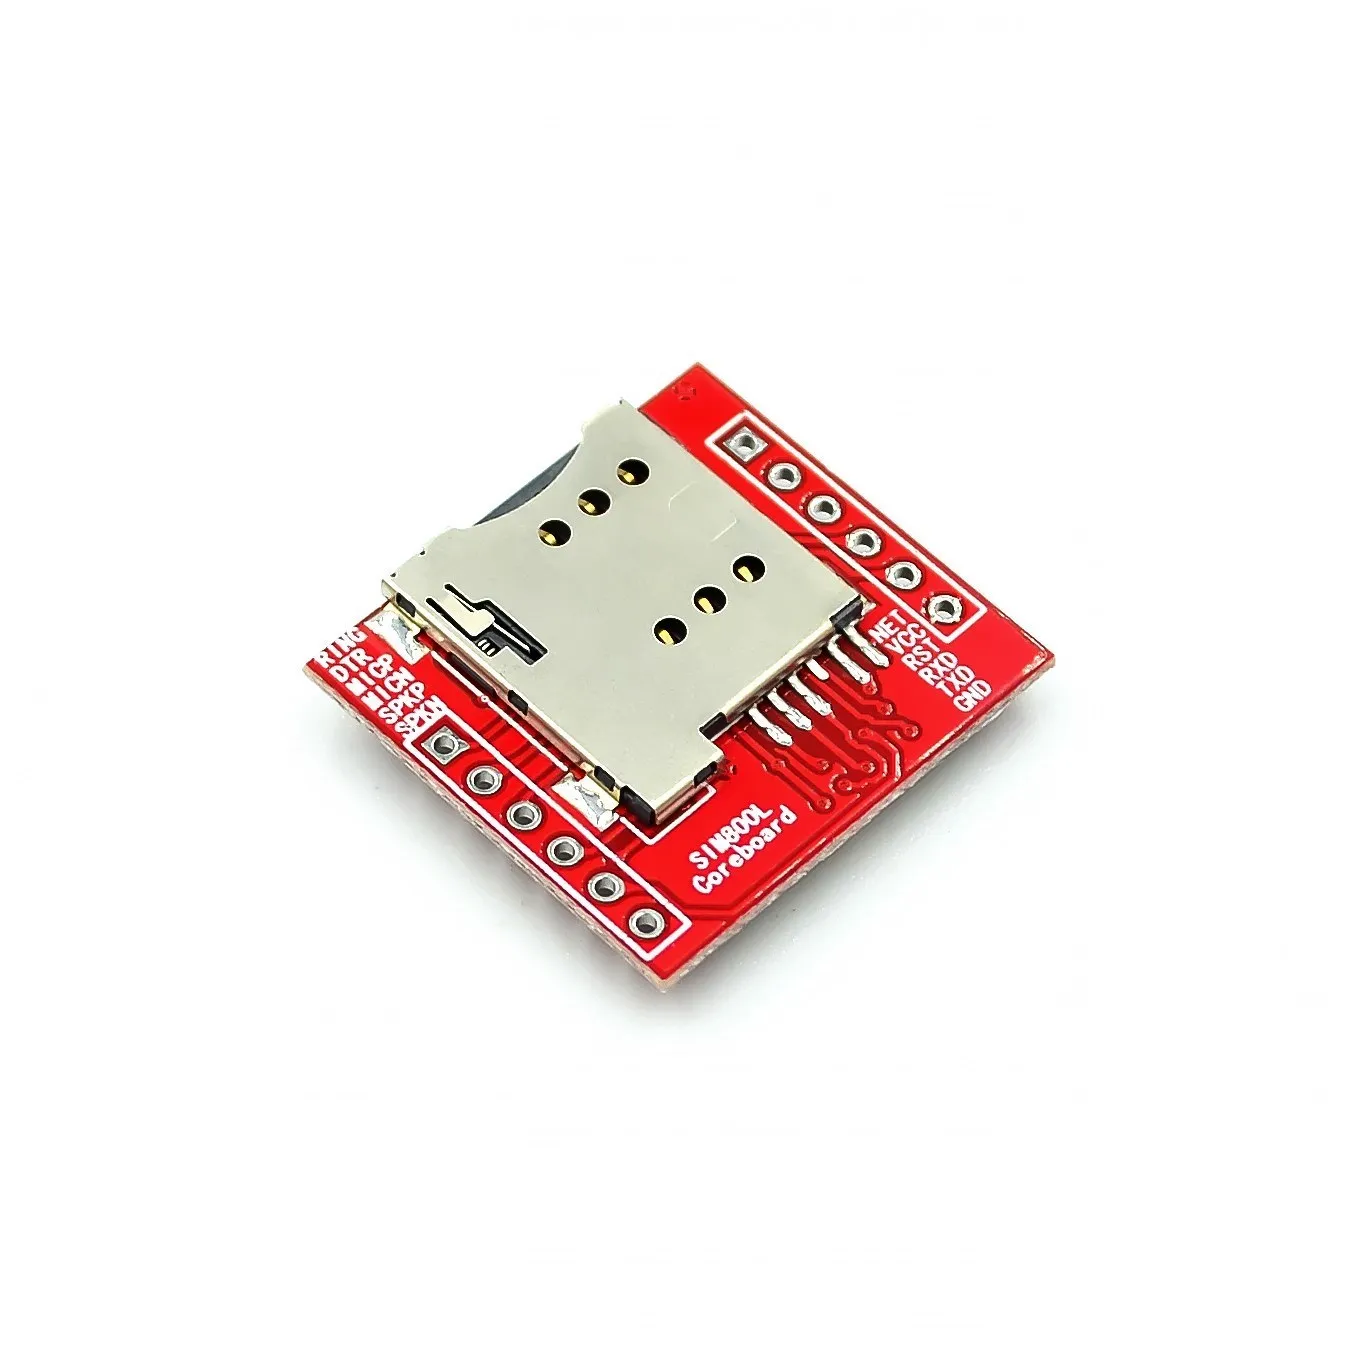 GPRS GSM Module Micro SIM Card Core Board Quad-band TTL Serial Port with Antenna PCB with new chip SIM800L